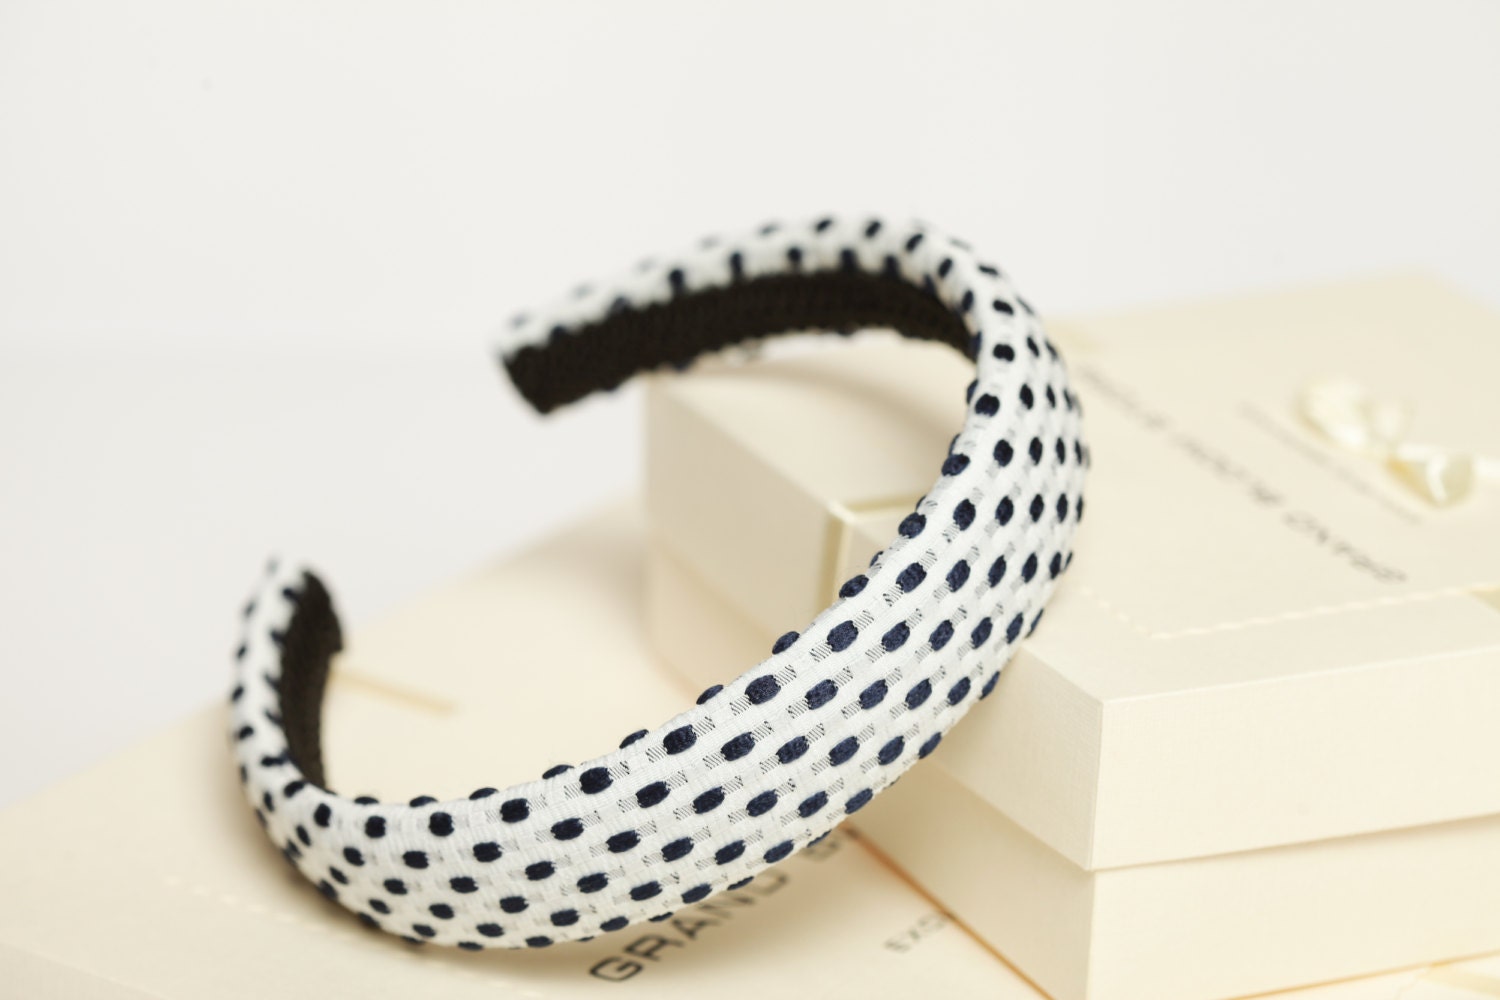 Dotted blue and white padded headband Padded headband Women headband Classic padded headband Girl headband Dotted hair band